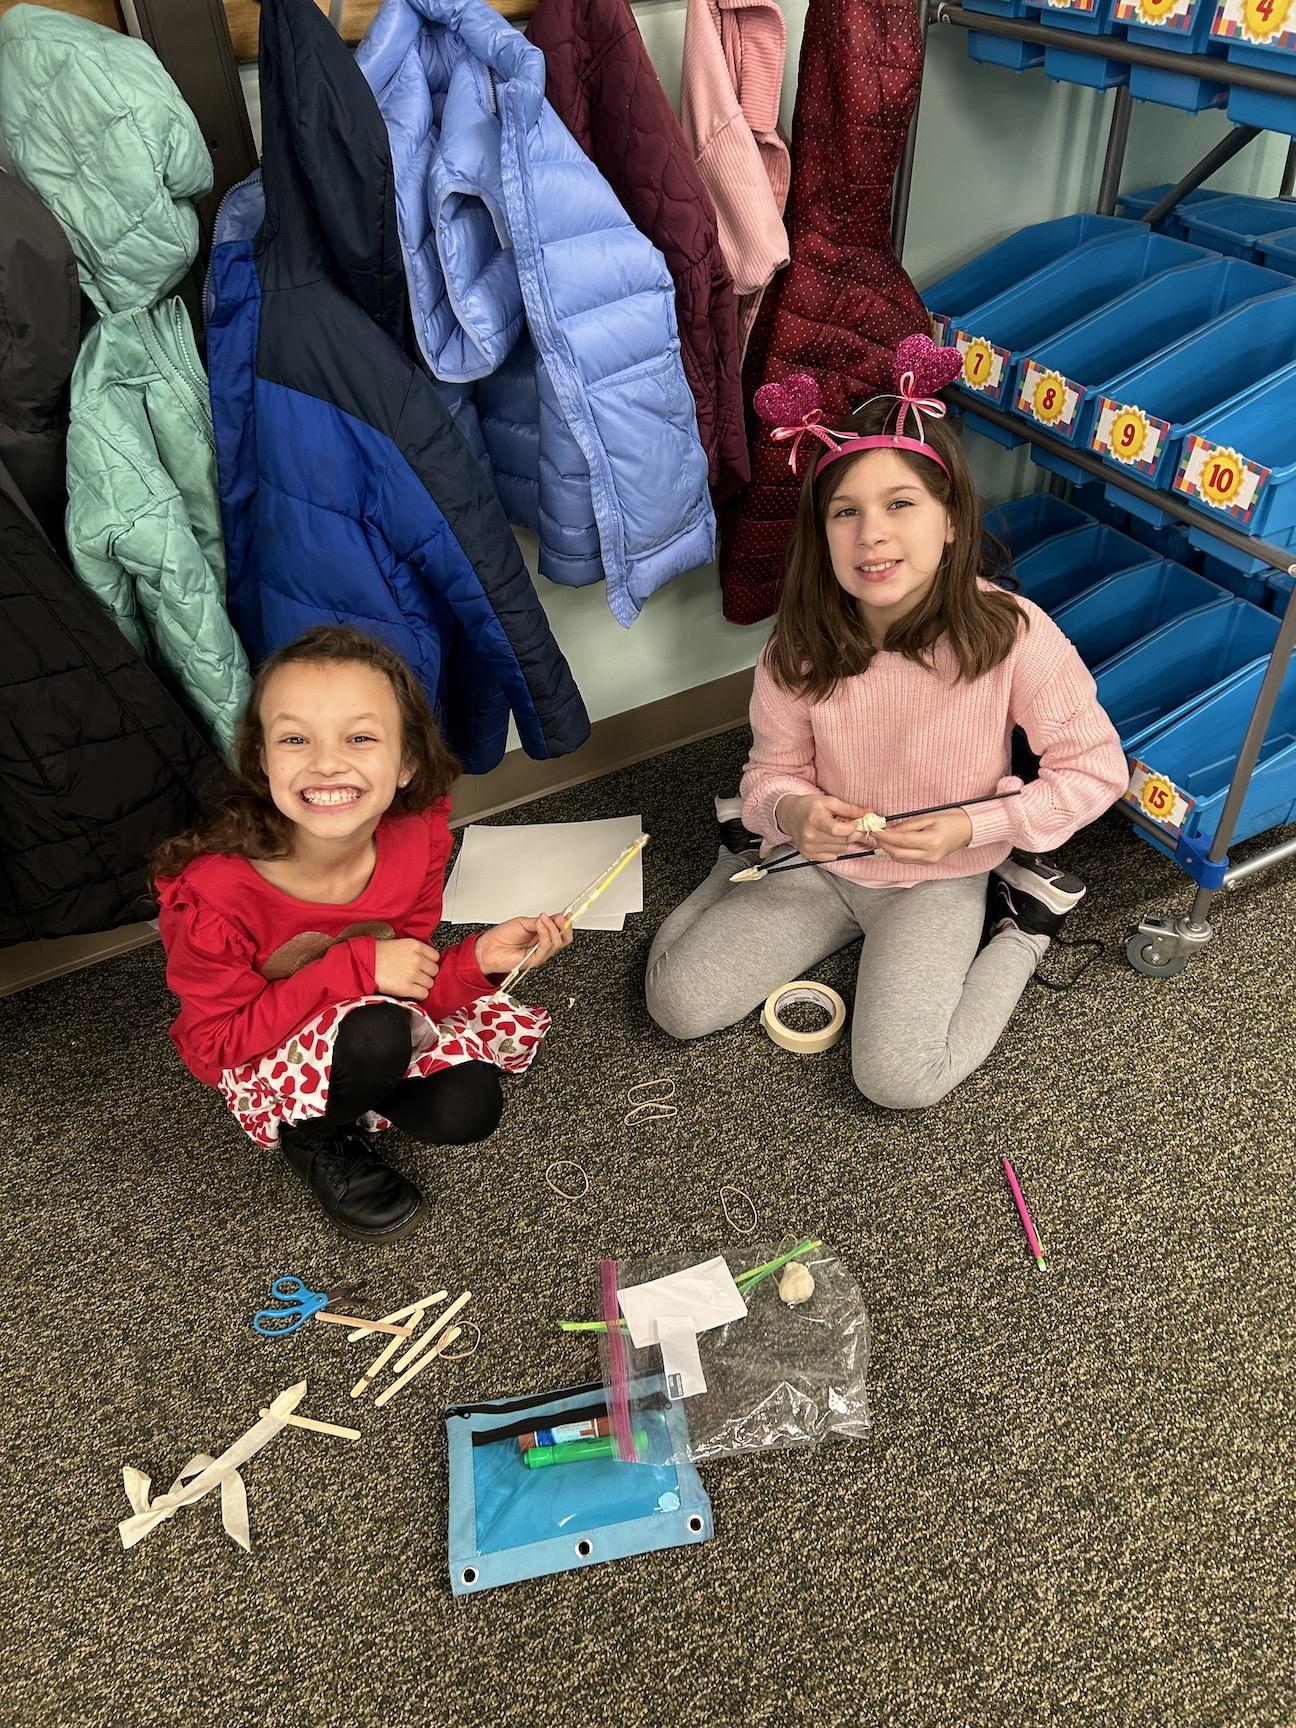 3rd-graders Tula DeFlavio and Caelyn Duddy work together to create a bow